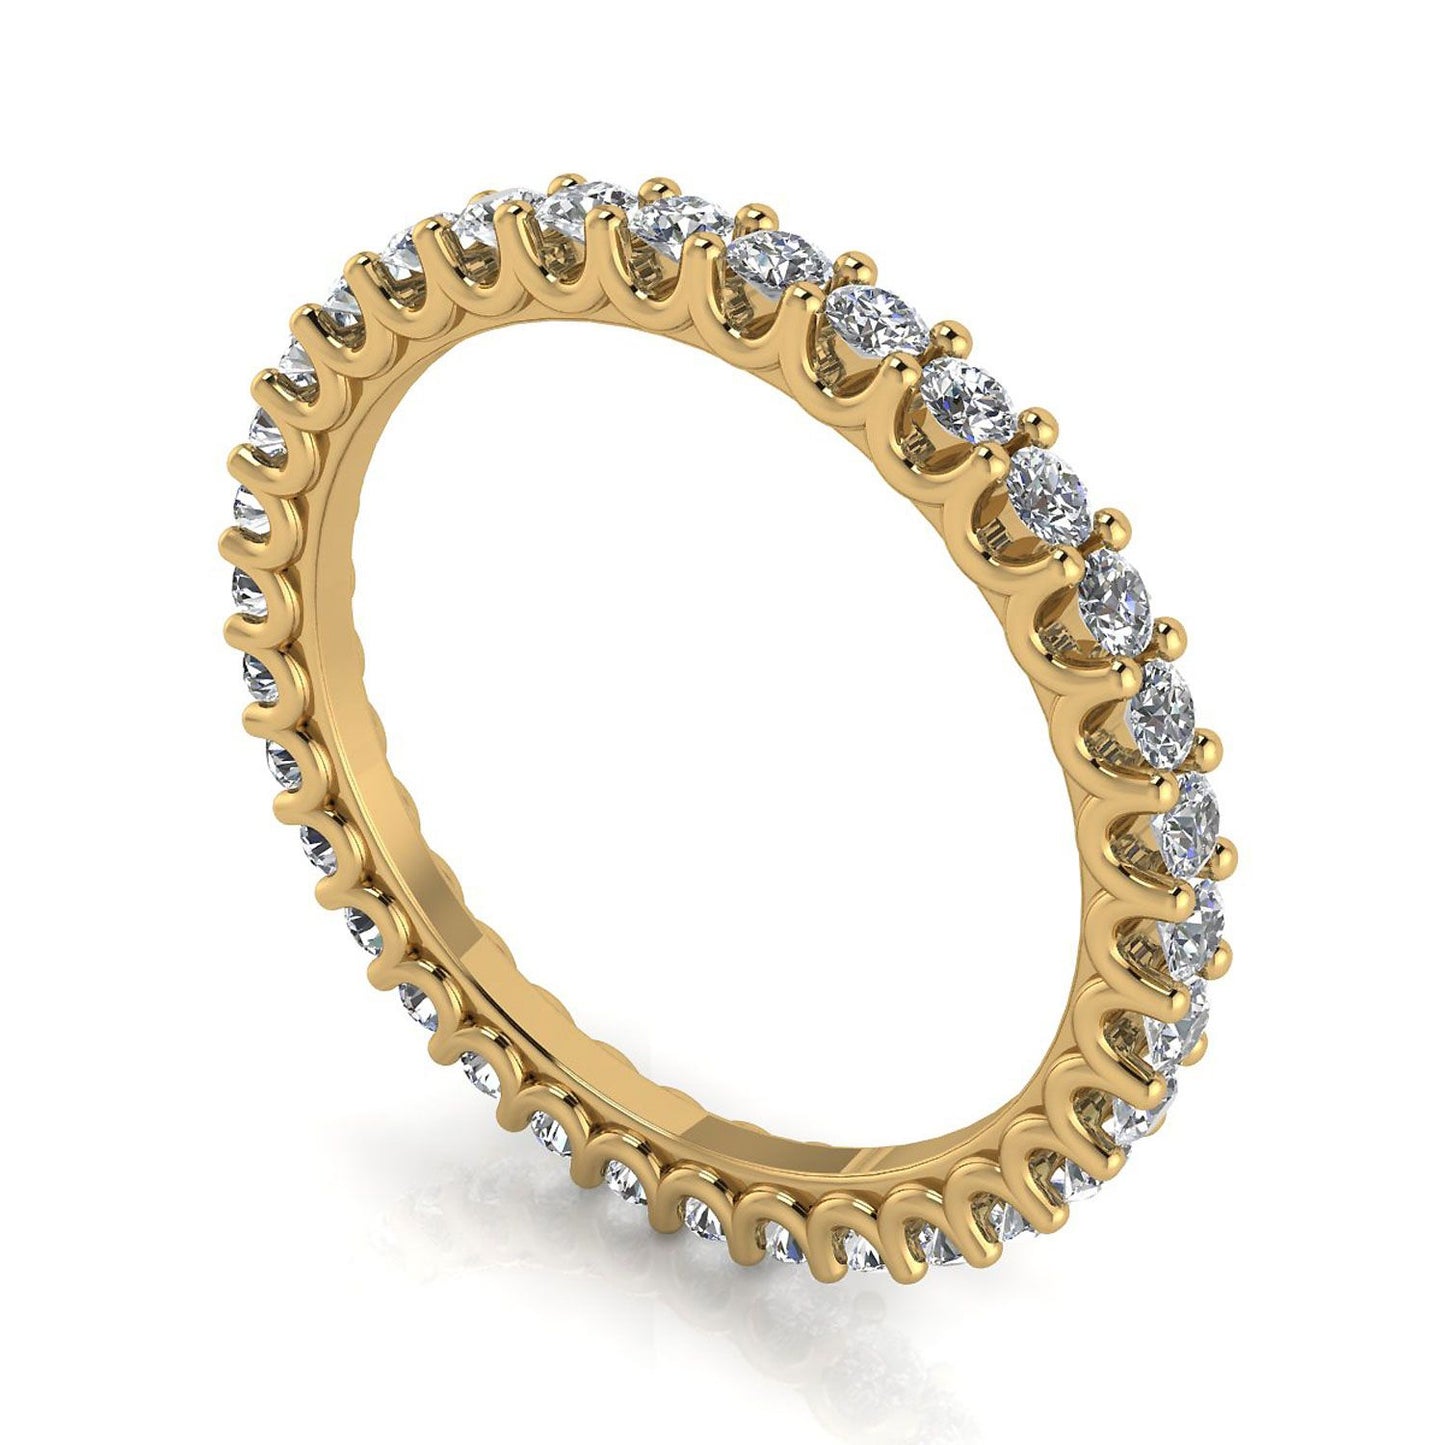 Round Brilliant Cut Diamond Shared Prong Set Eternity Ring In 18k Yellow Gold  (1.49ct. Tw.) Ring Size 6